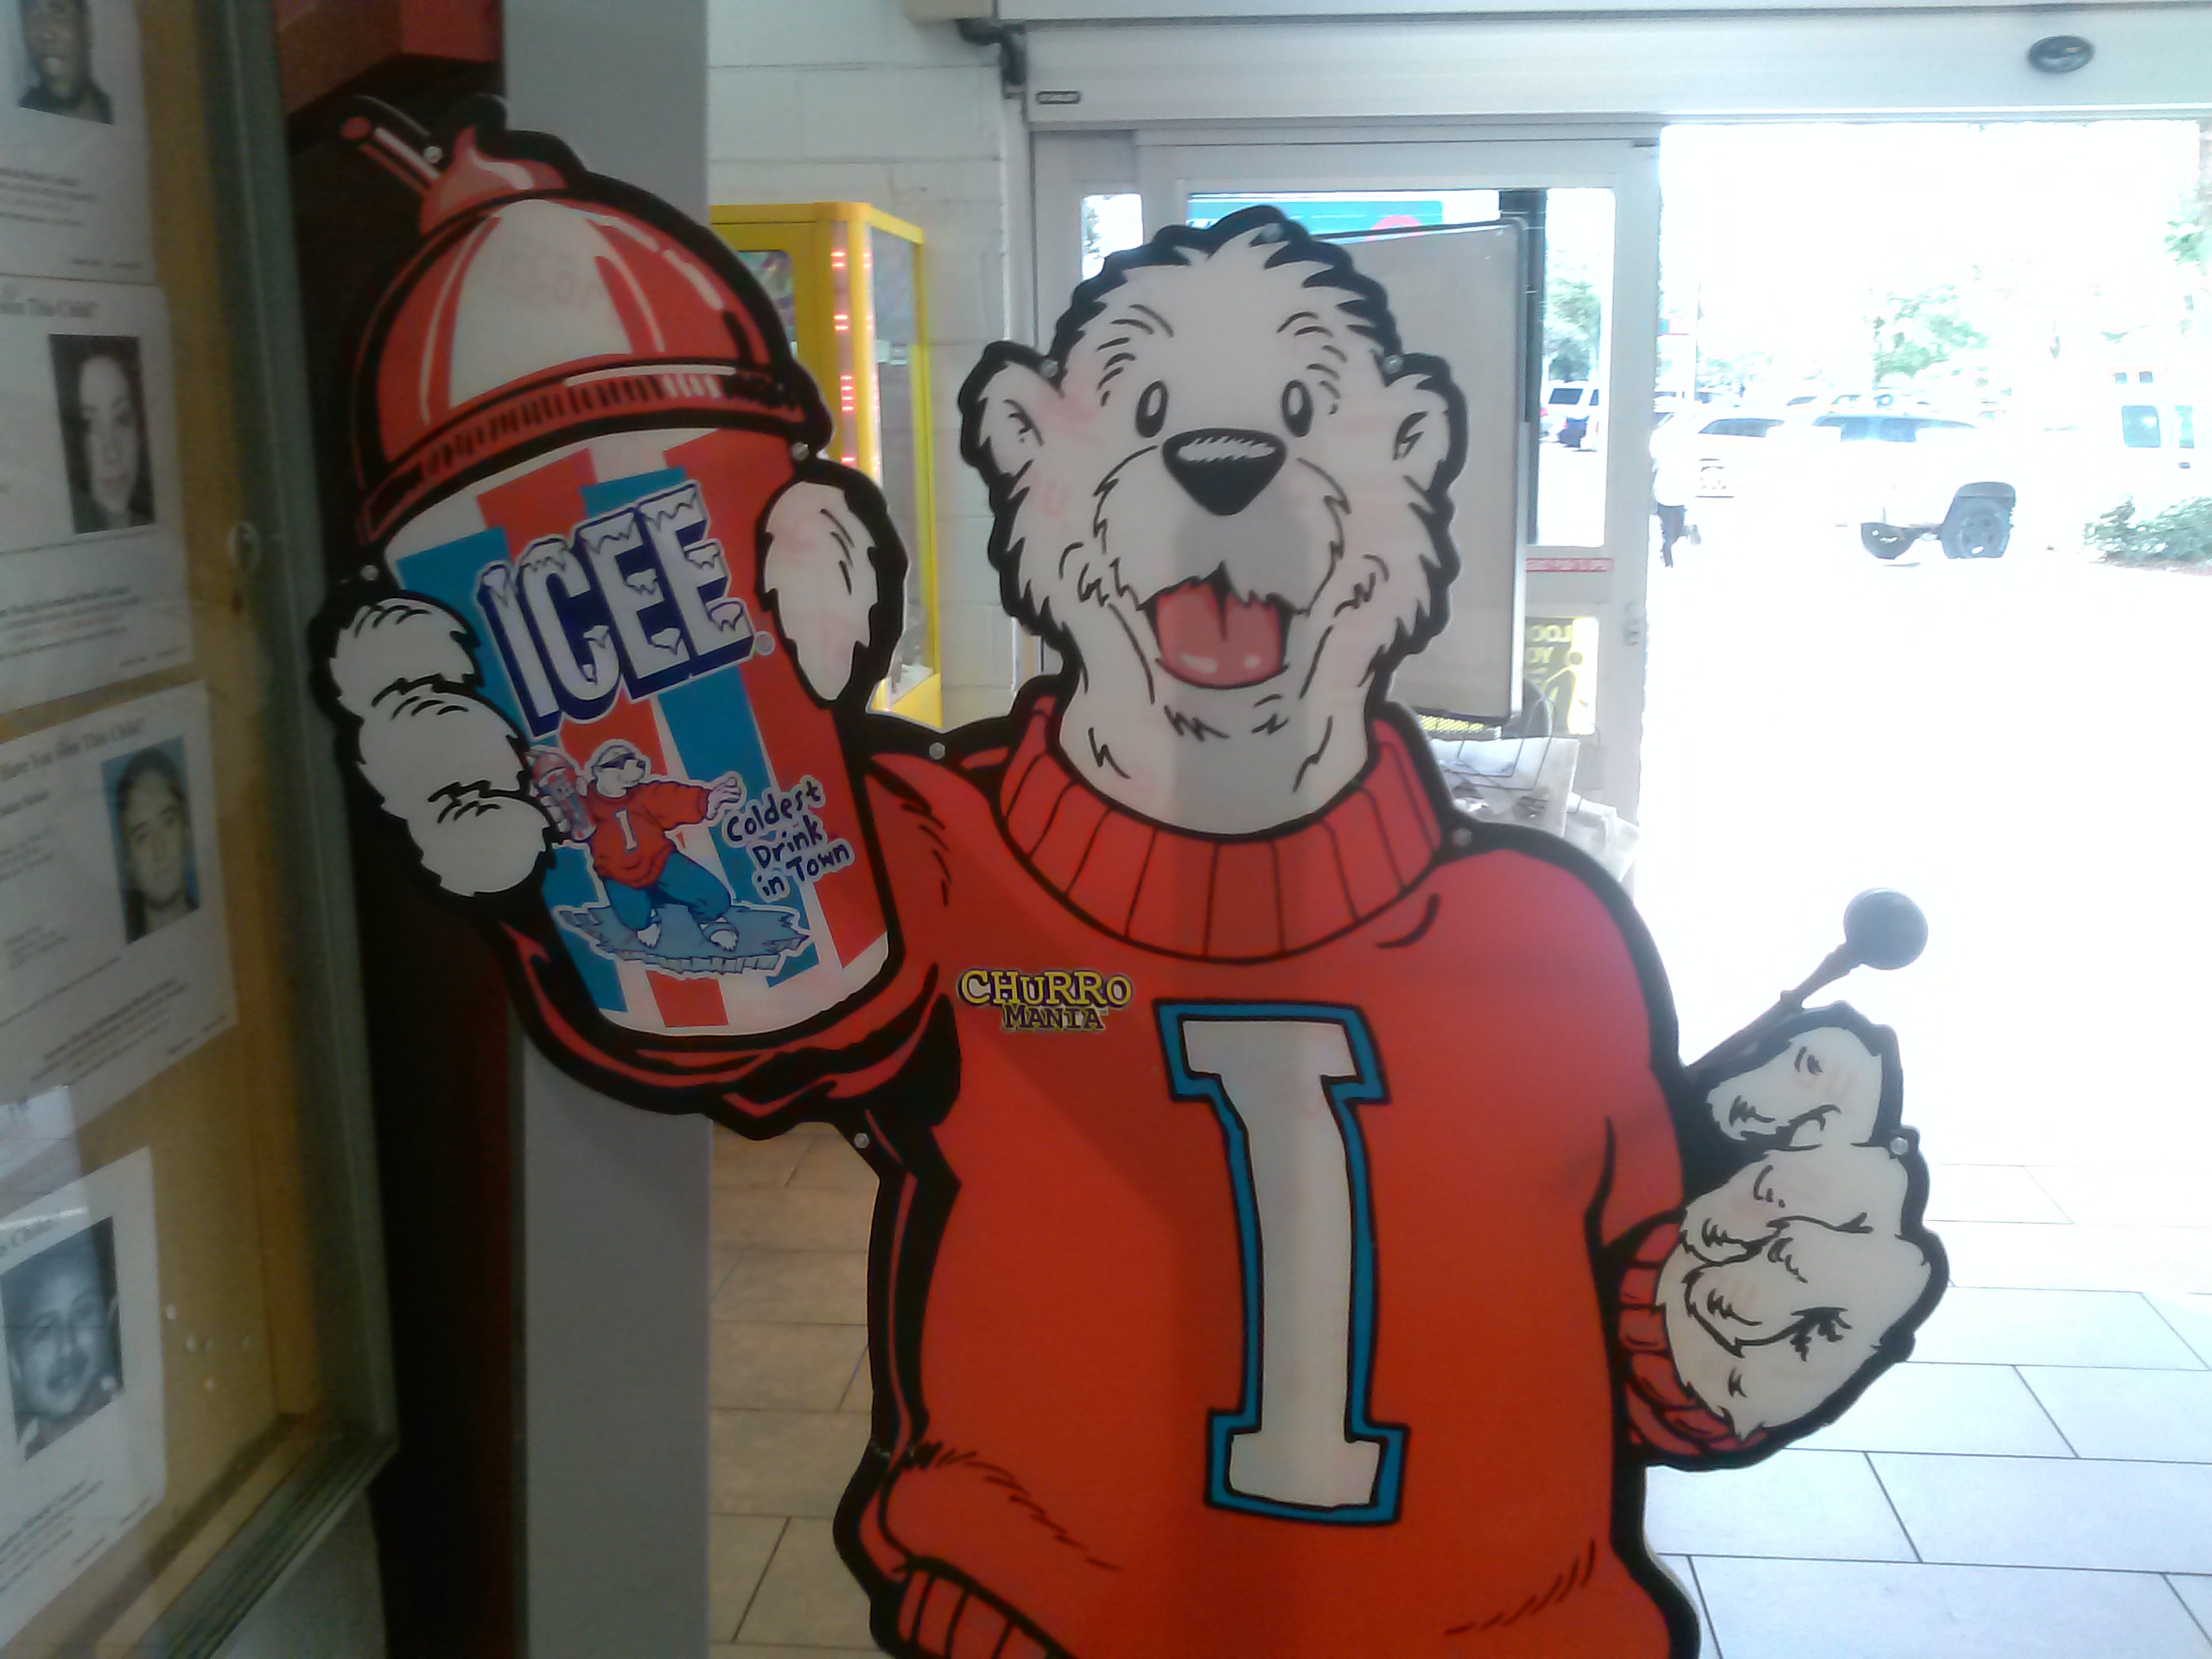 Dixieland Gavel Asks The Icee Bear For Directions Back Home